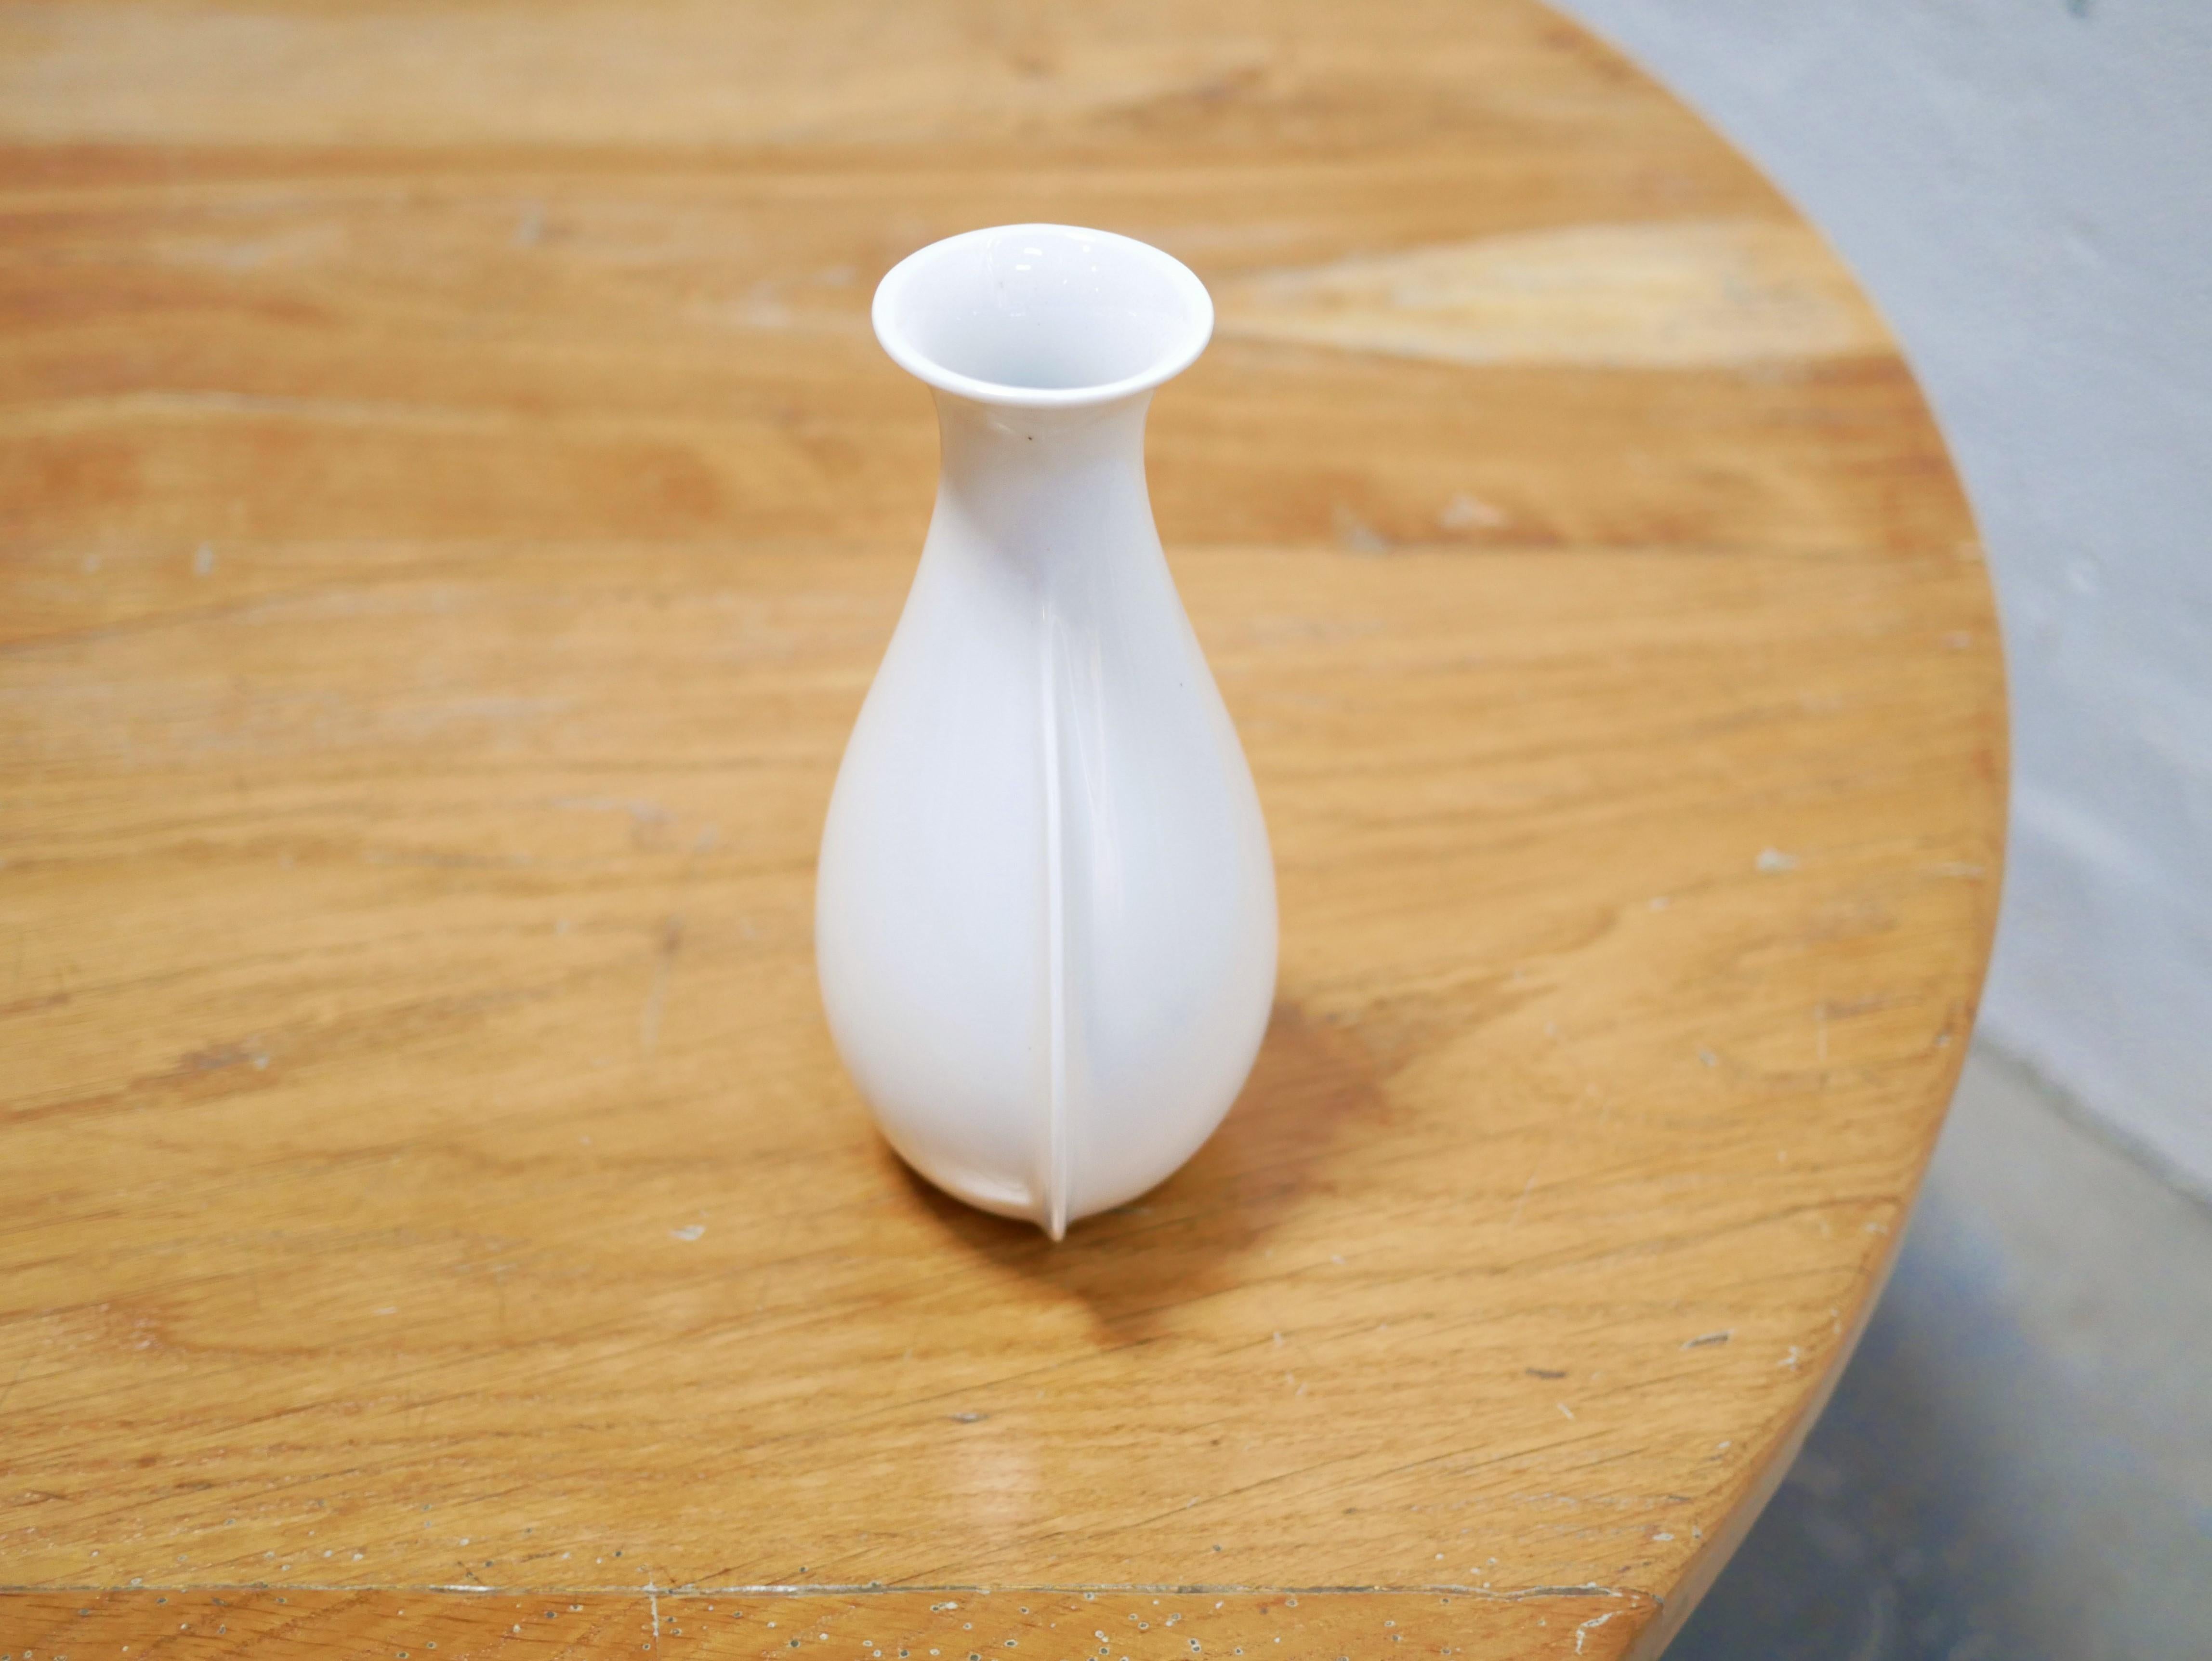 Vintage White Porcelain Vase by the Seltmann Weiden Factory, Germany 1